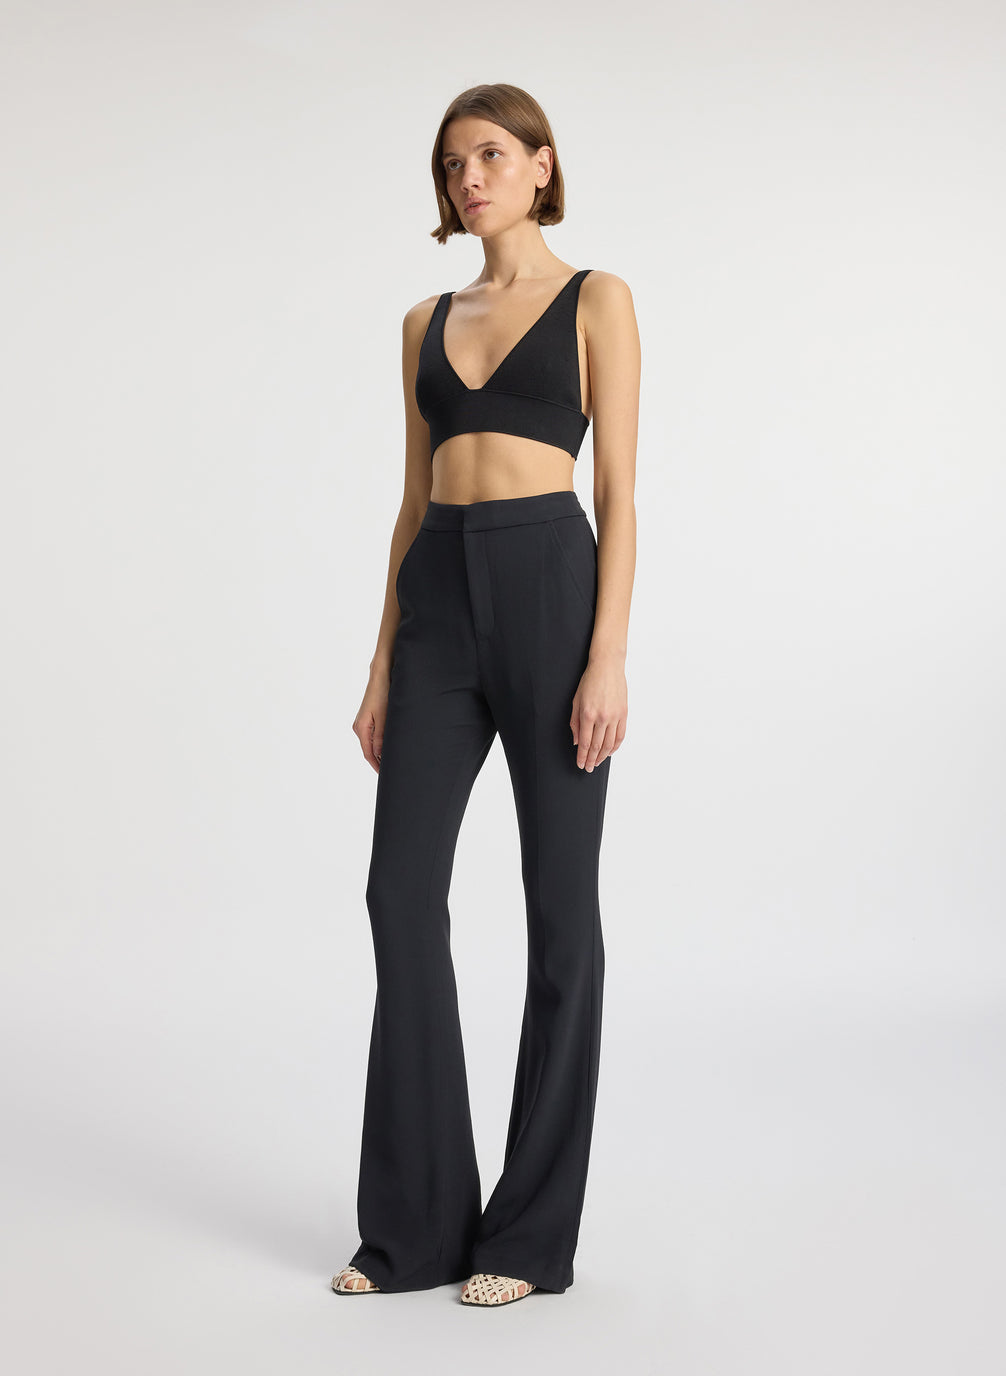 side view of woman wearing black knit bra and black flared pants